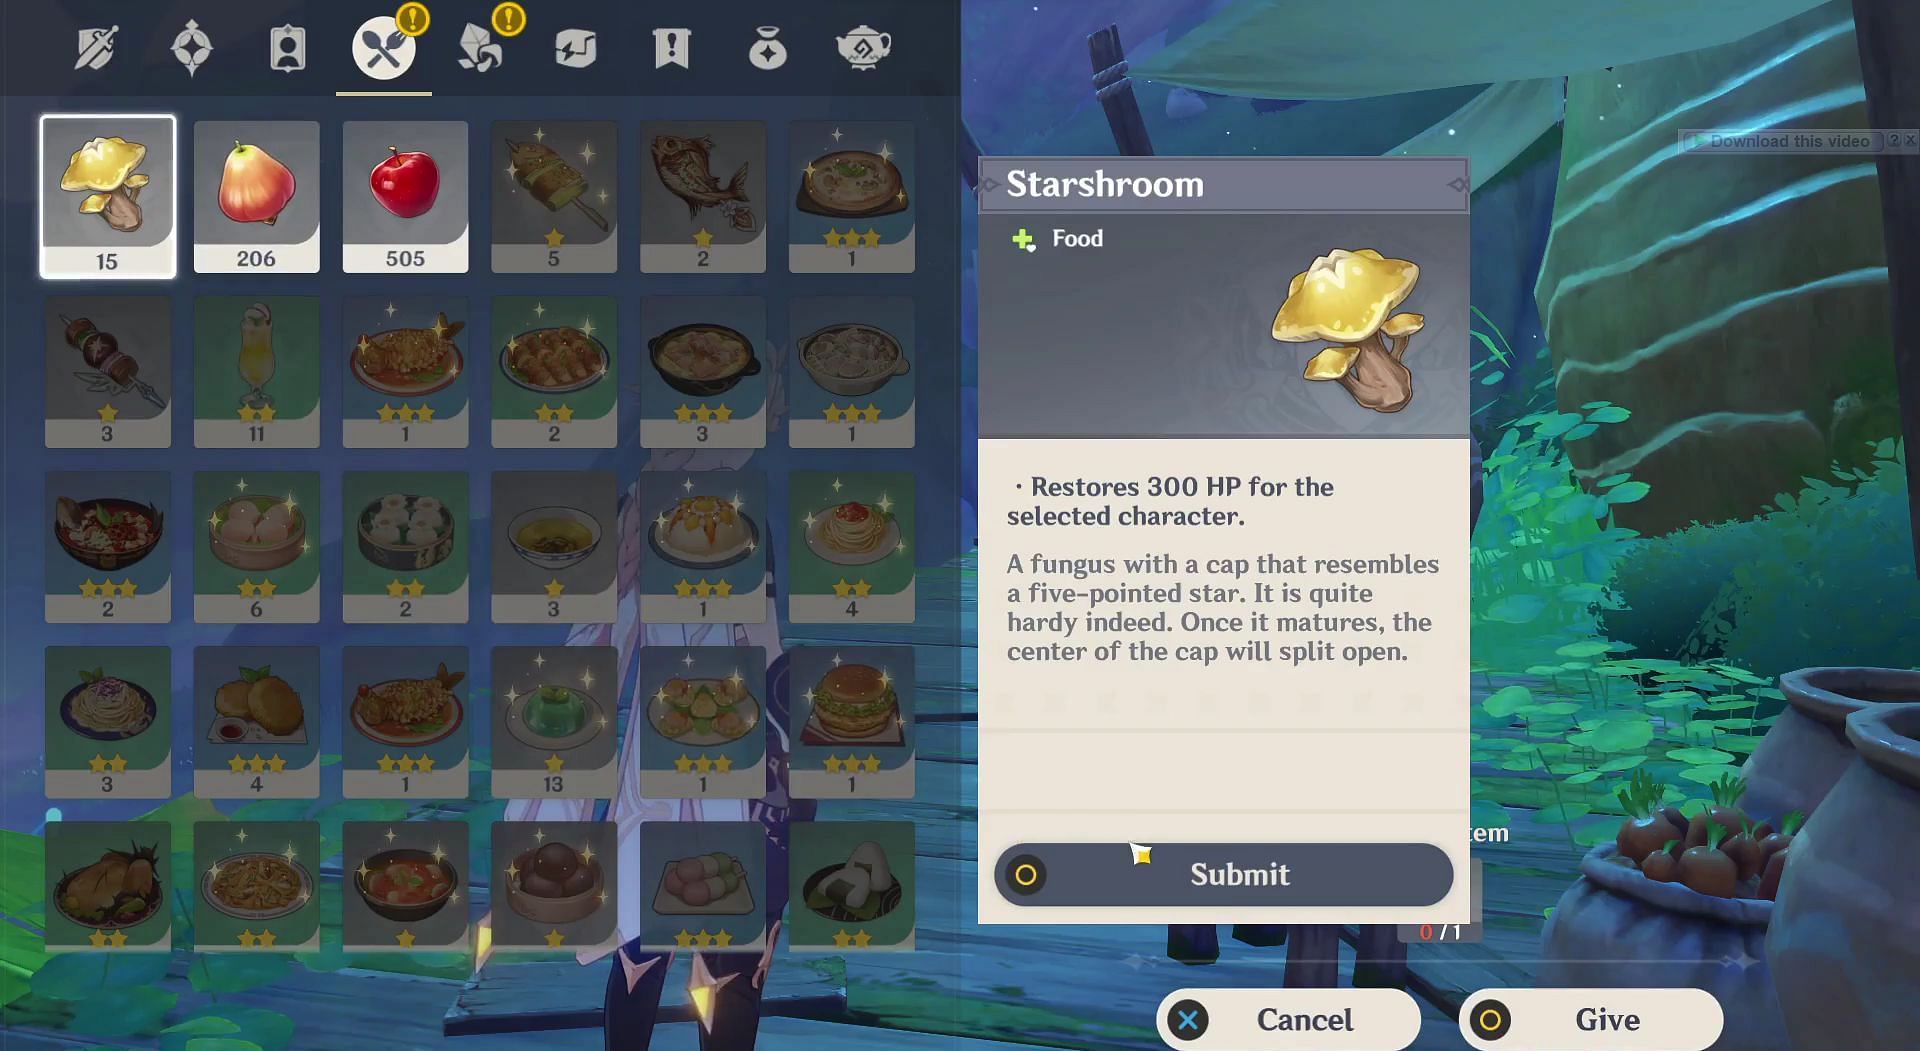 Starshroom is the answer to the third riddle (Image via HoYoverse)